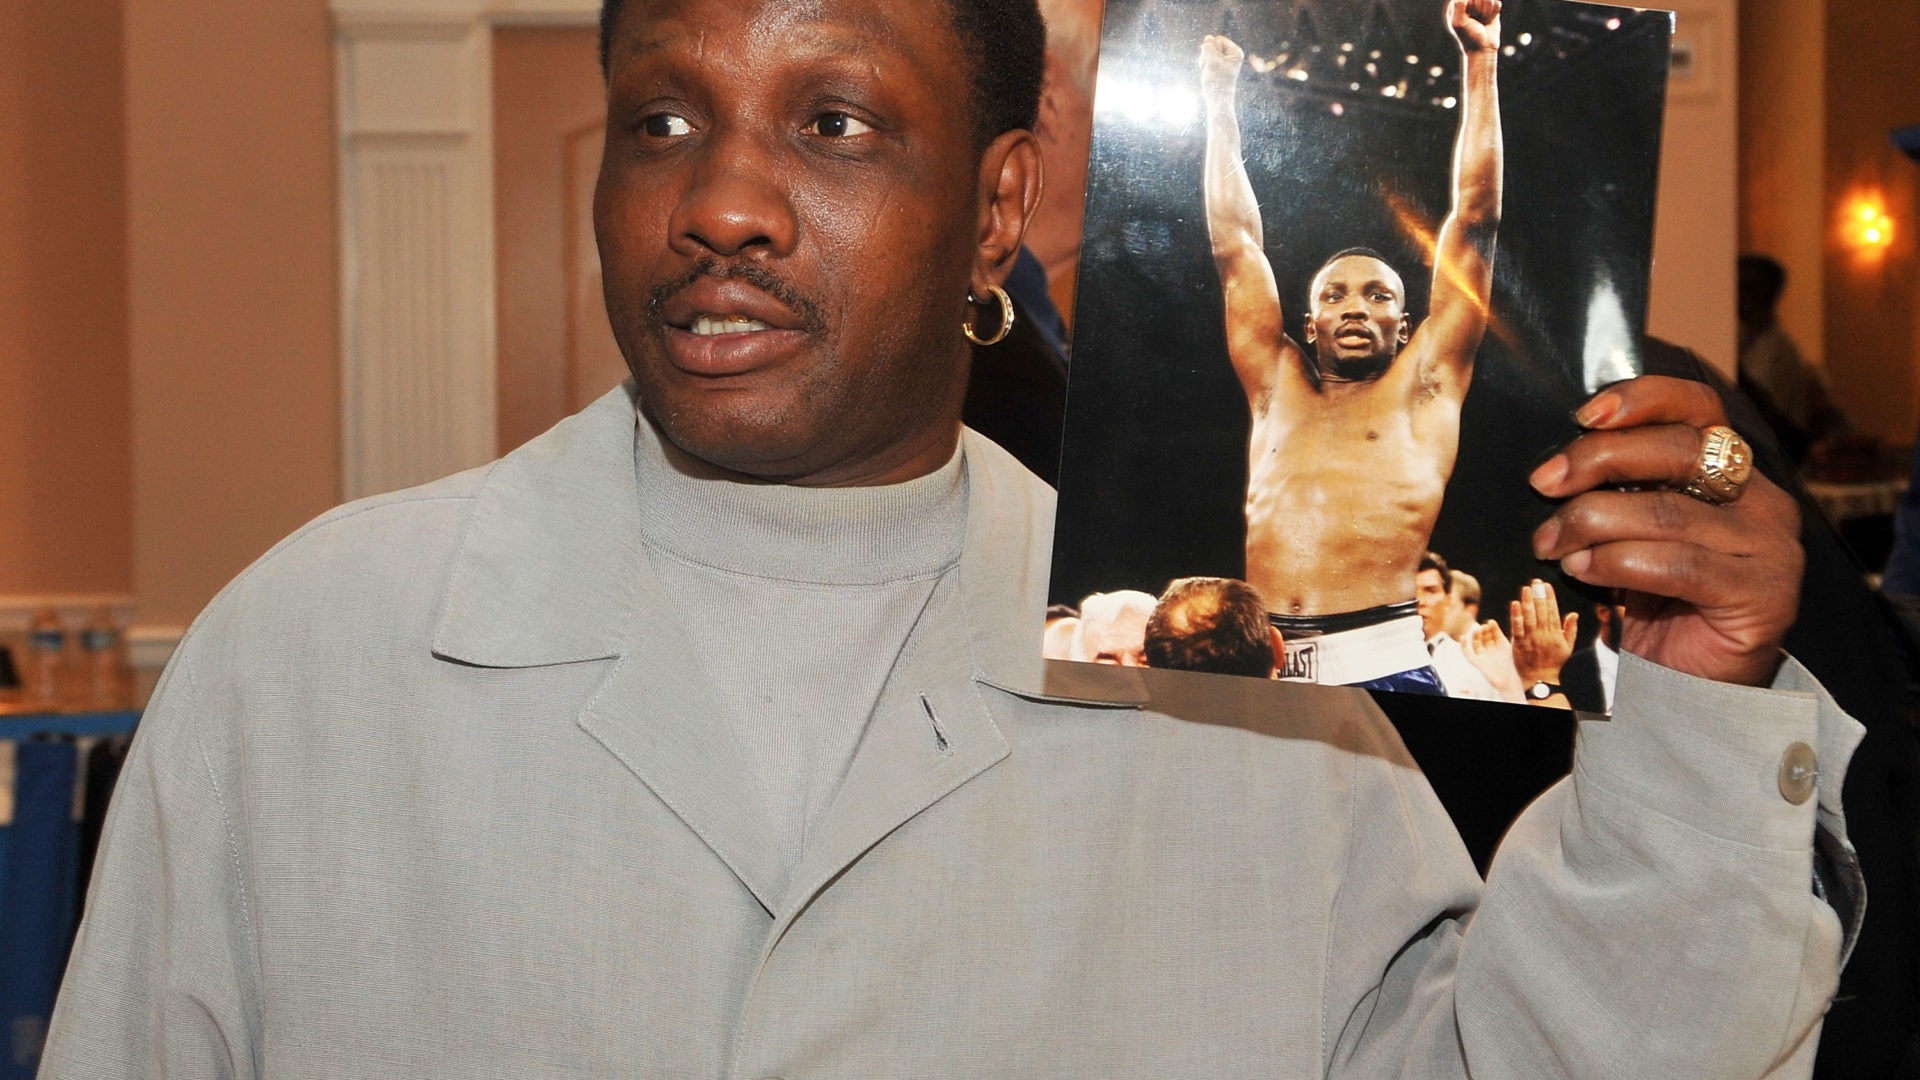 Boxing Champion Pernell “Sweet Pea” Whitaker Dead After Being Struck By Vehicle in Virginia